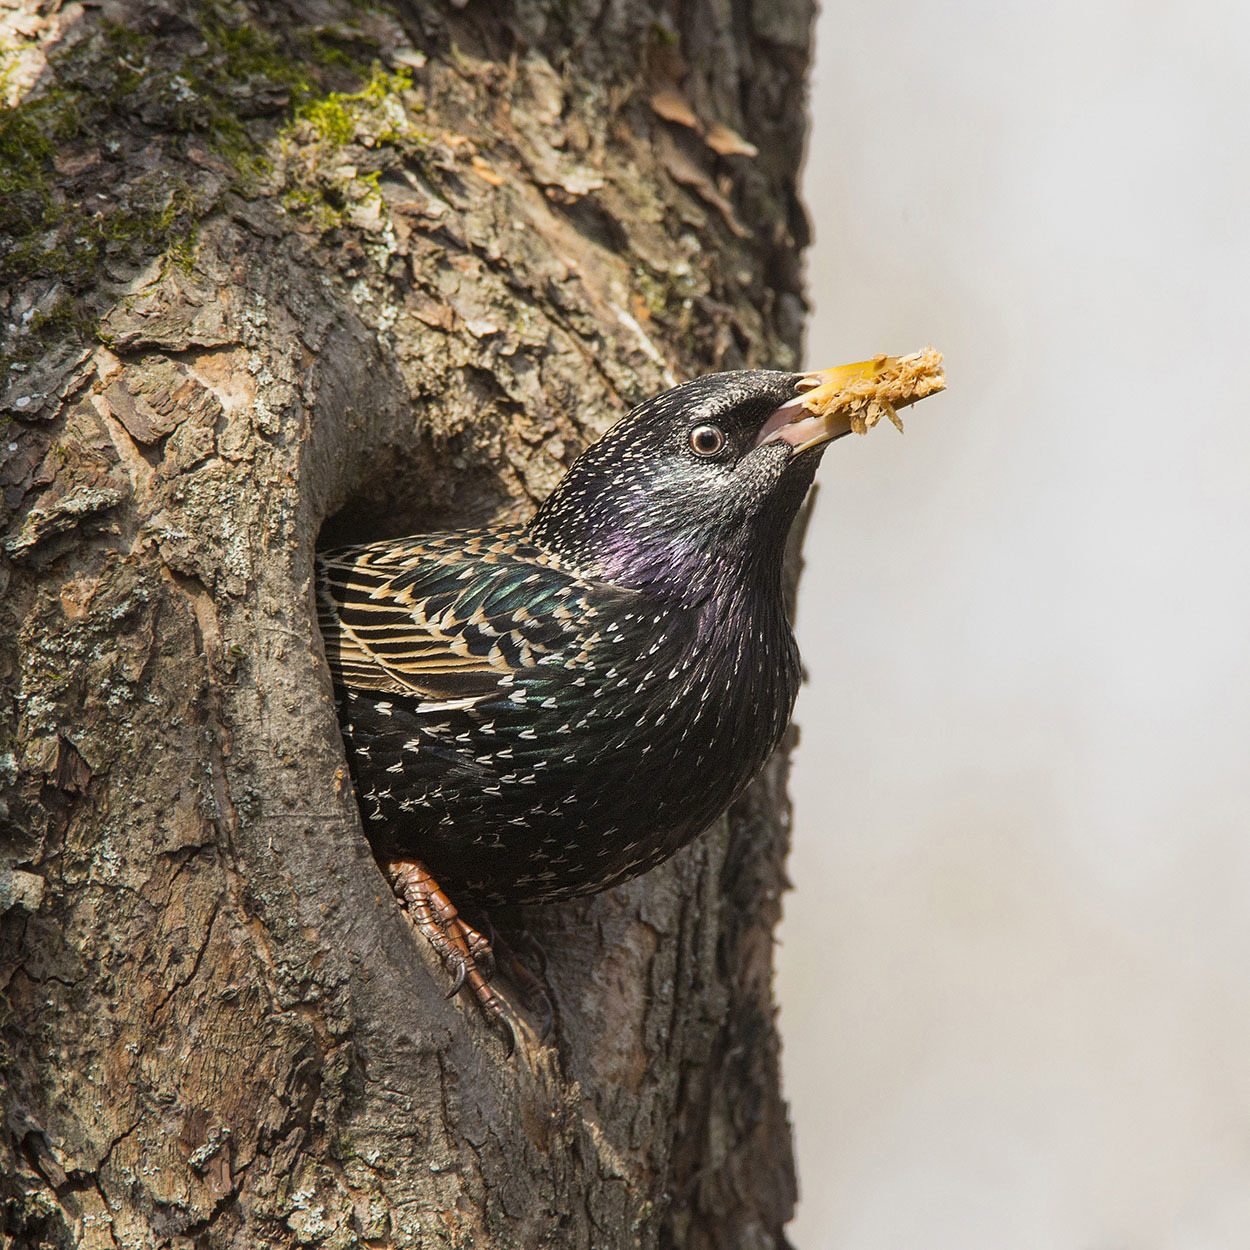 Starling builds a nest. Picture taken on Losiny Island